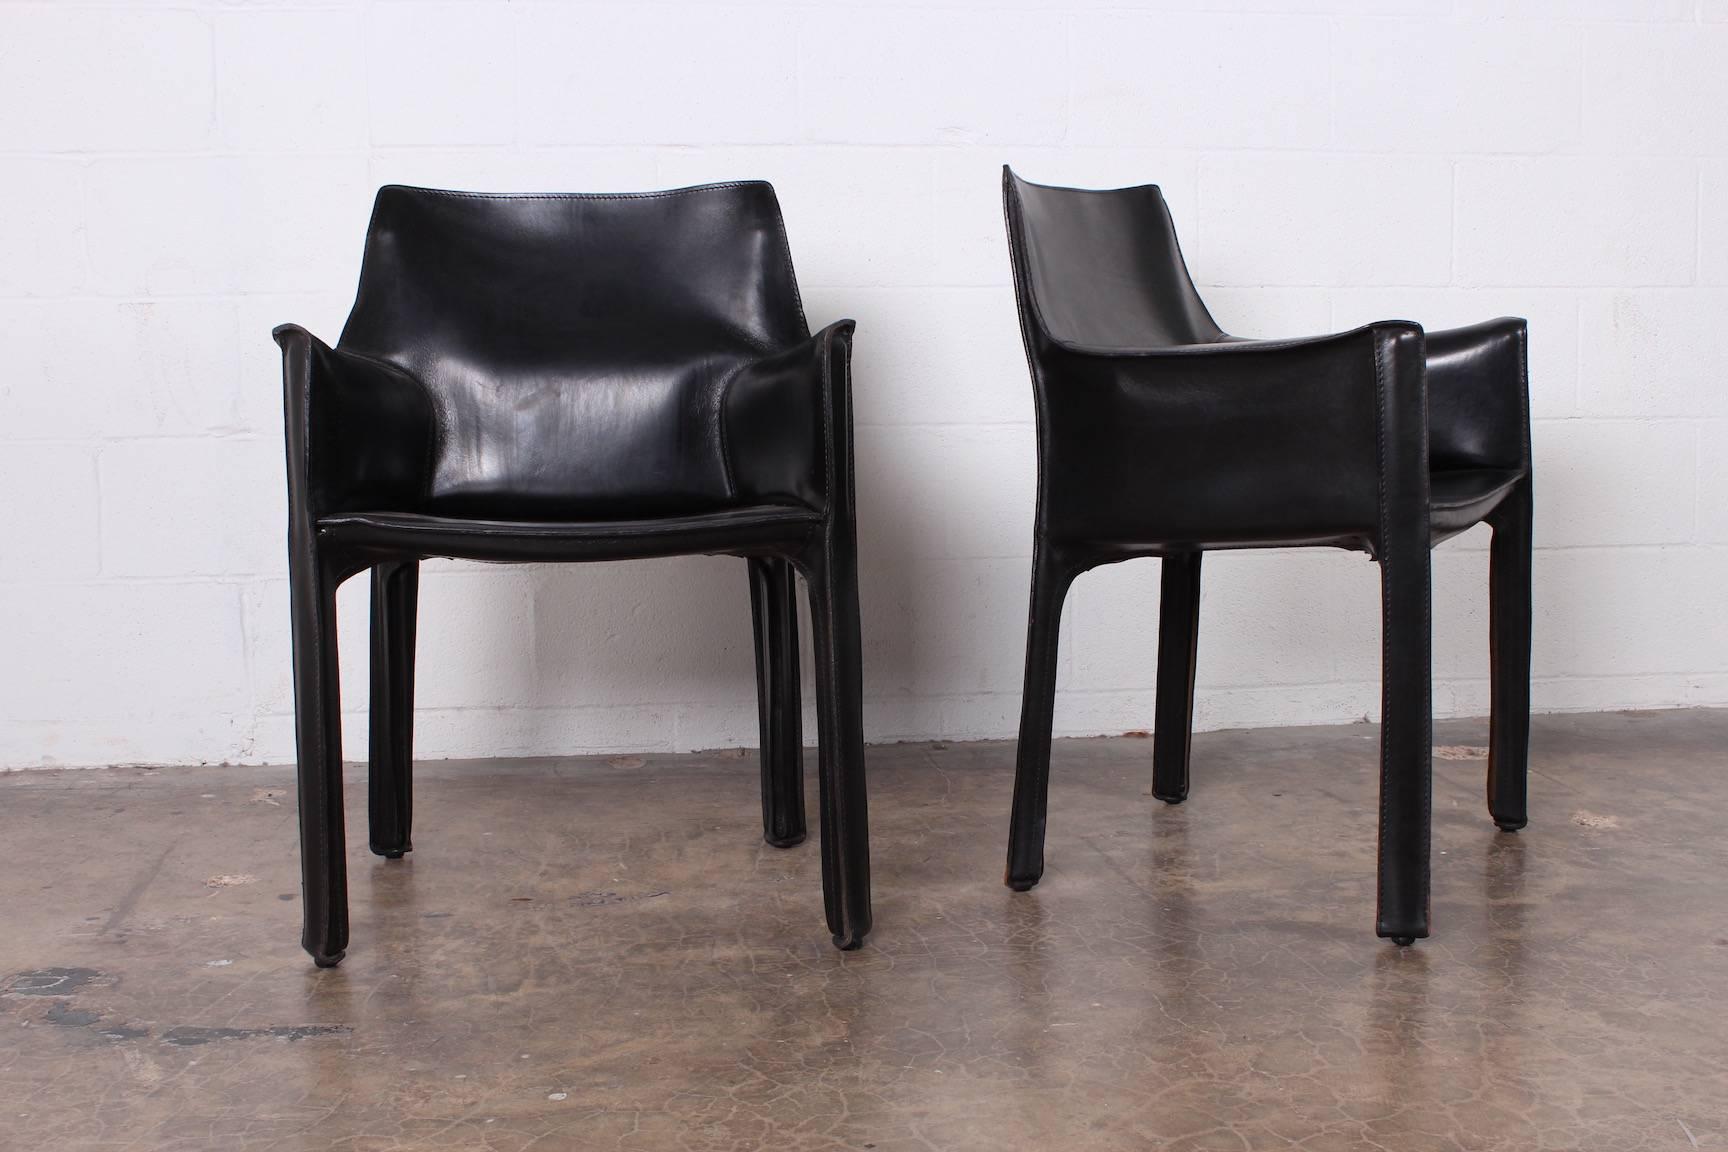 A vintage set of ten black leather Cab armchairs designed by Mario Bellini for Cassina.